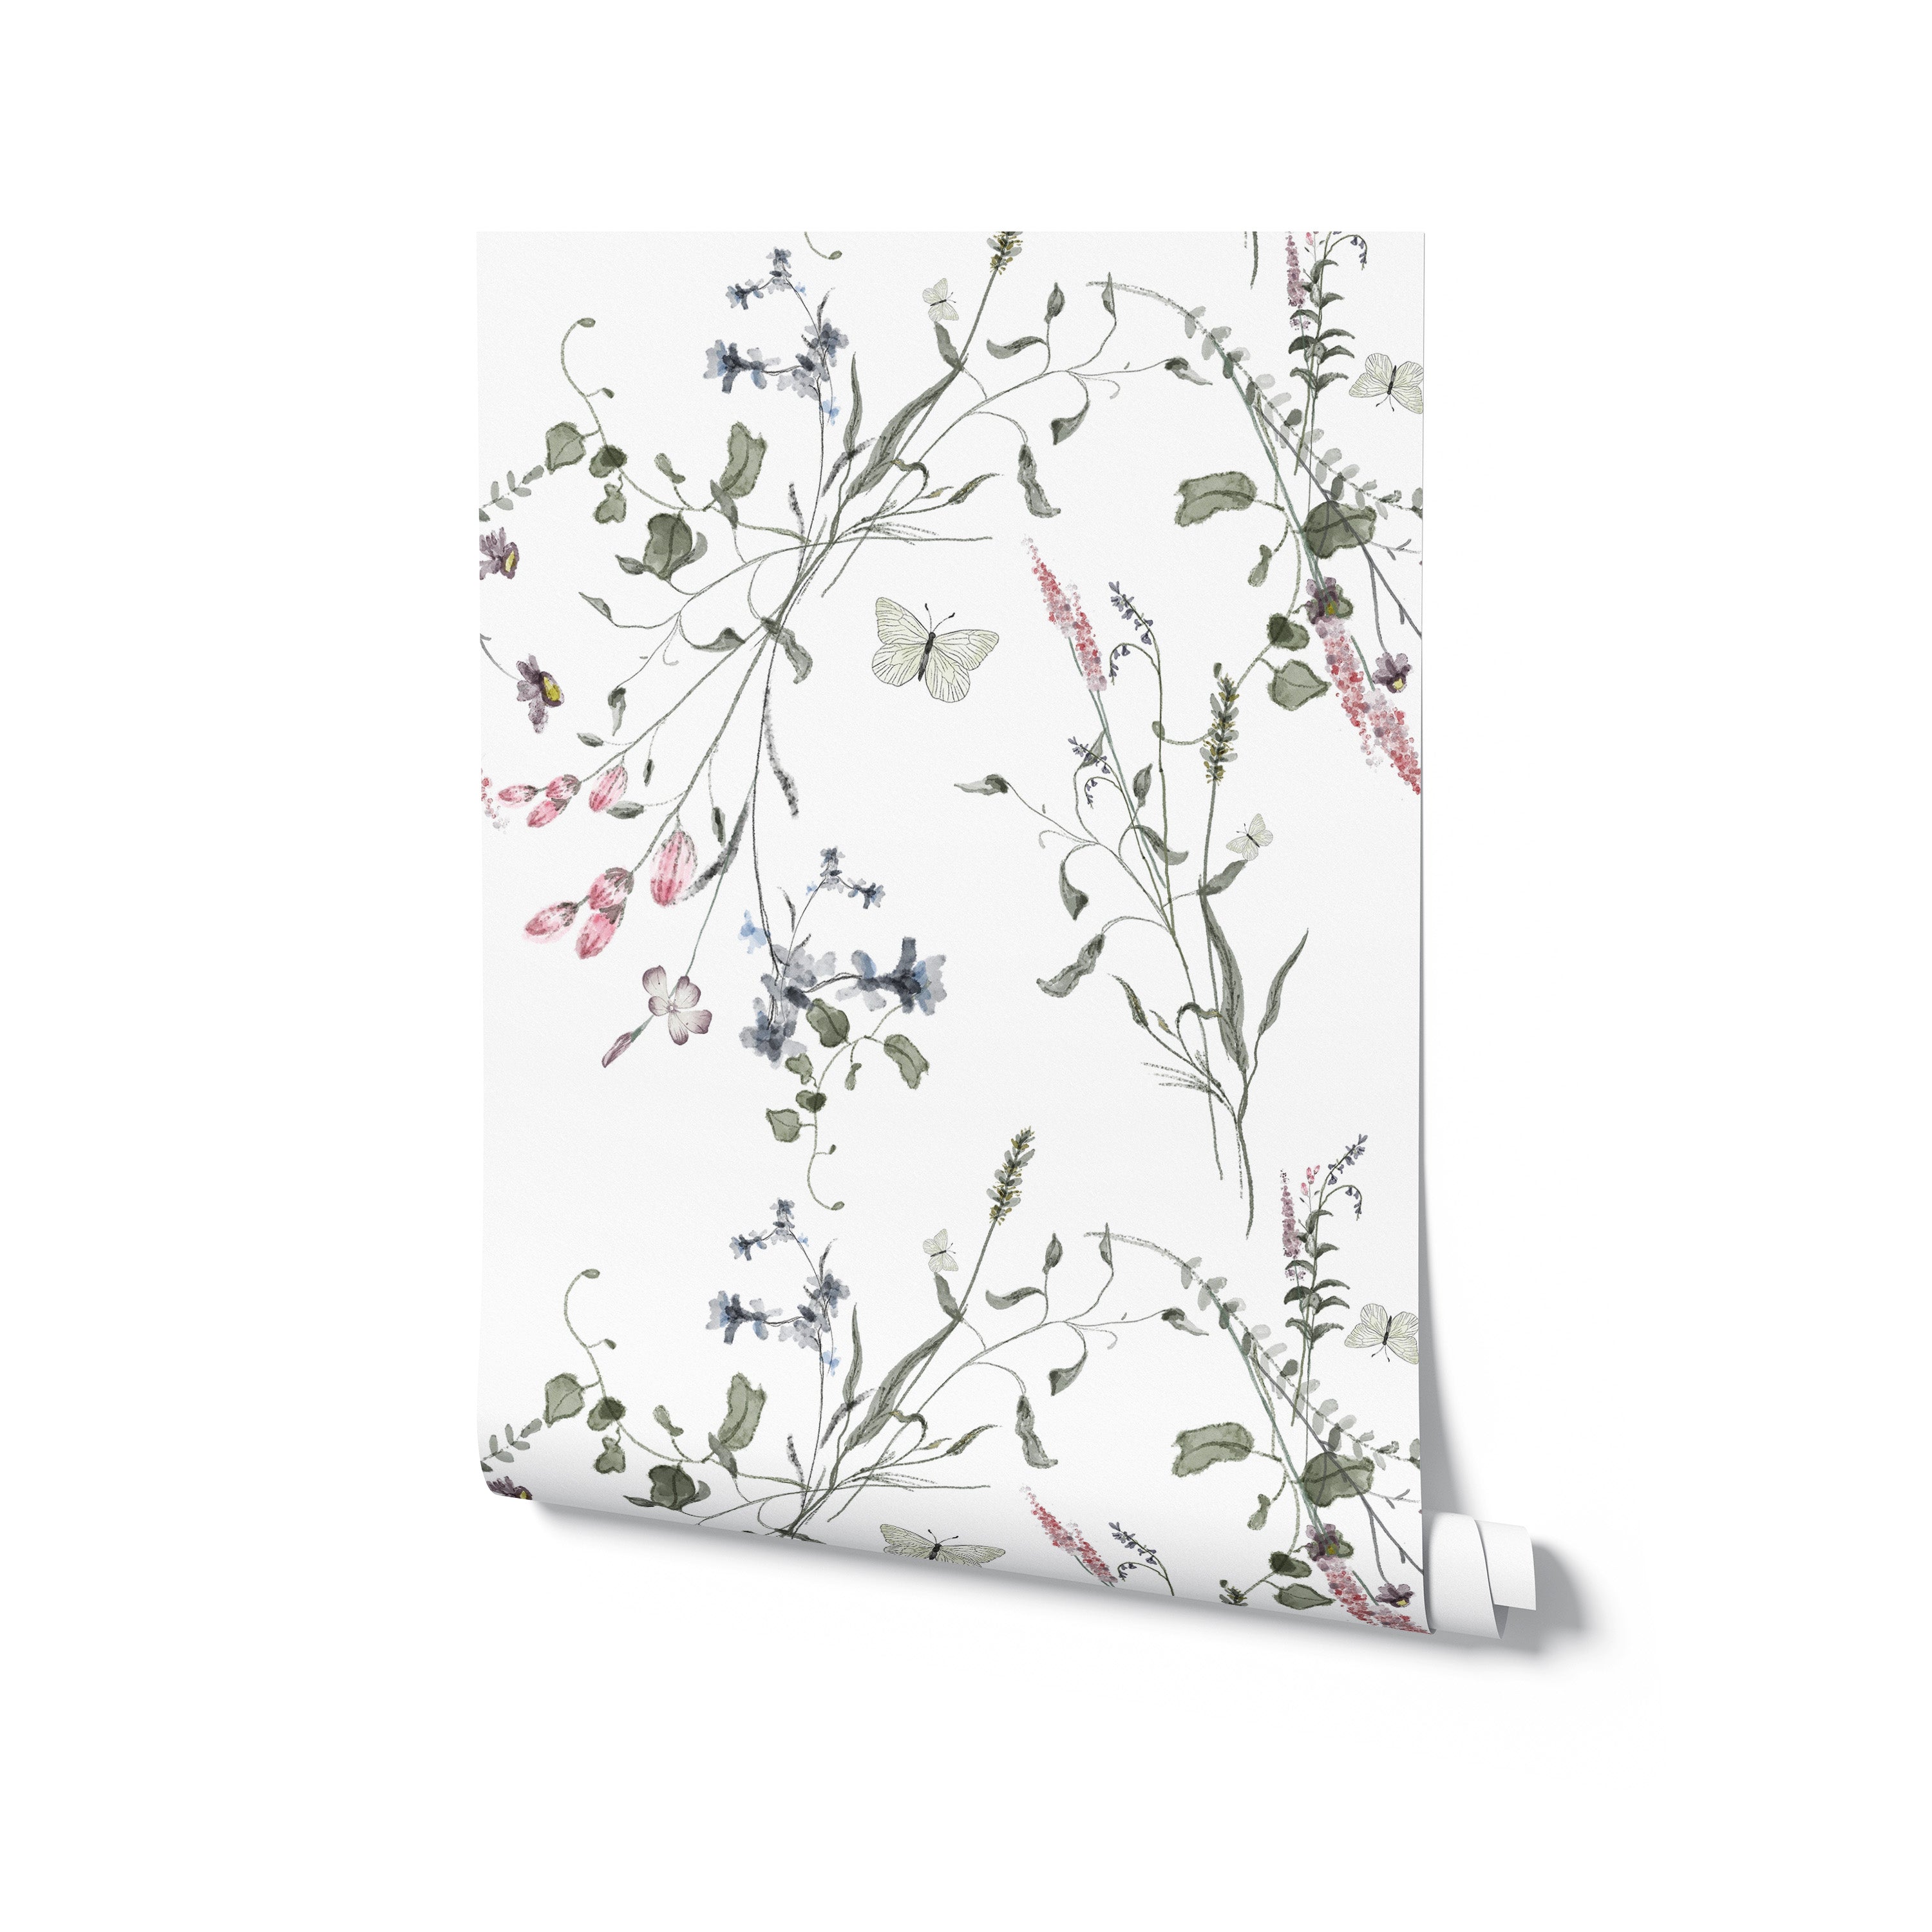 A roll of Lovely Botanicals Wallpaper depicting its elegant design of intertwined flowers and leaves with subtle butterflies, perfect for bringing a touch of nature's tranquility to any interior space.